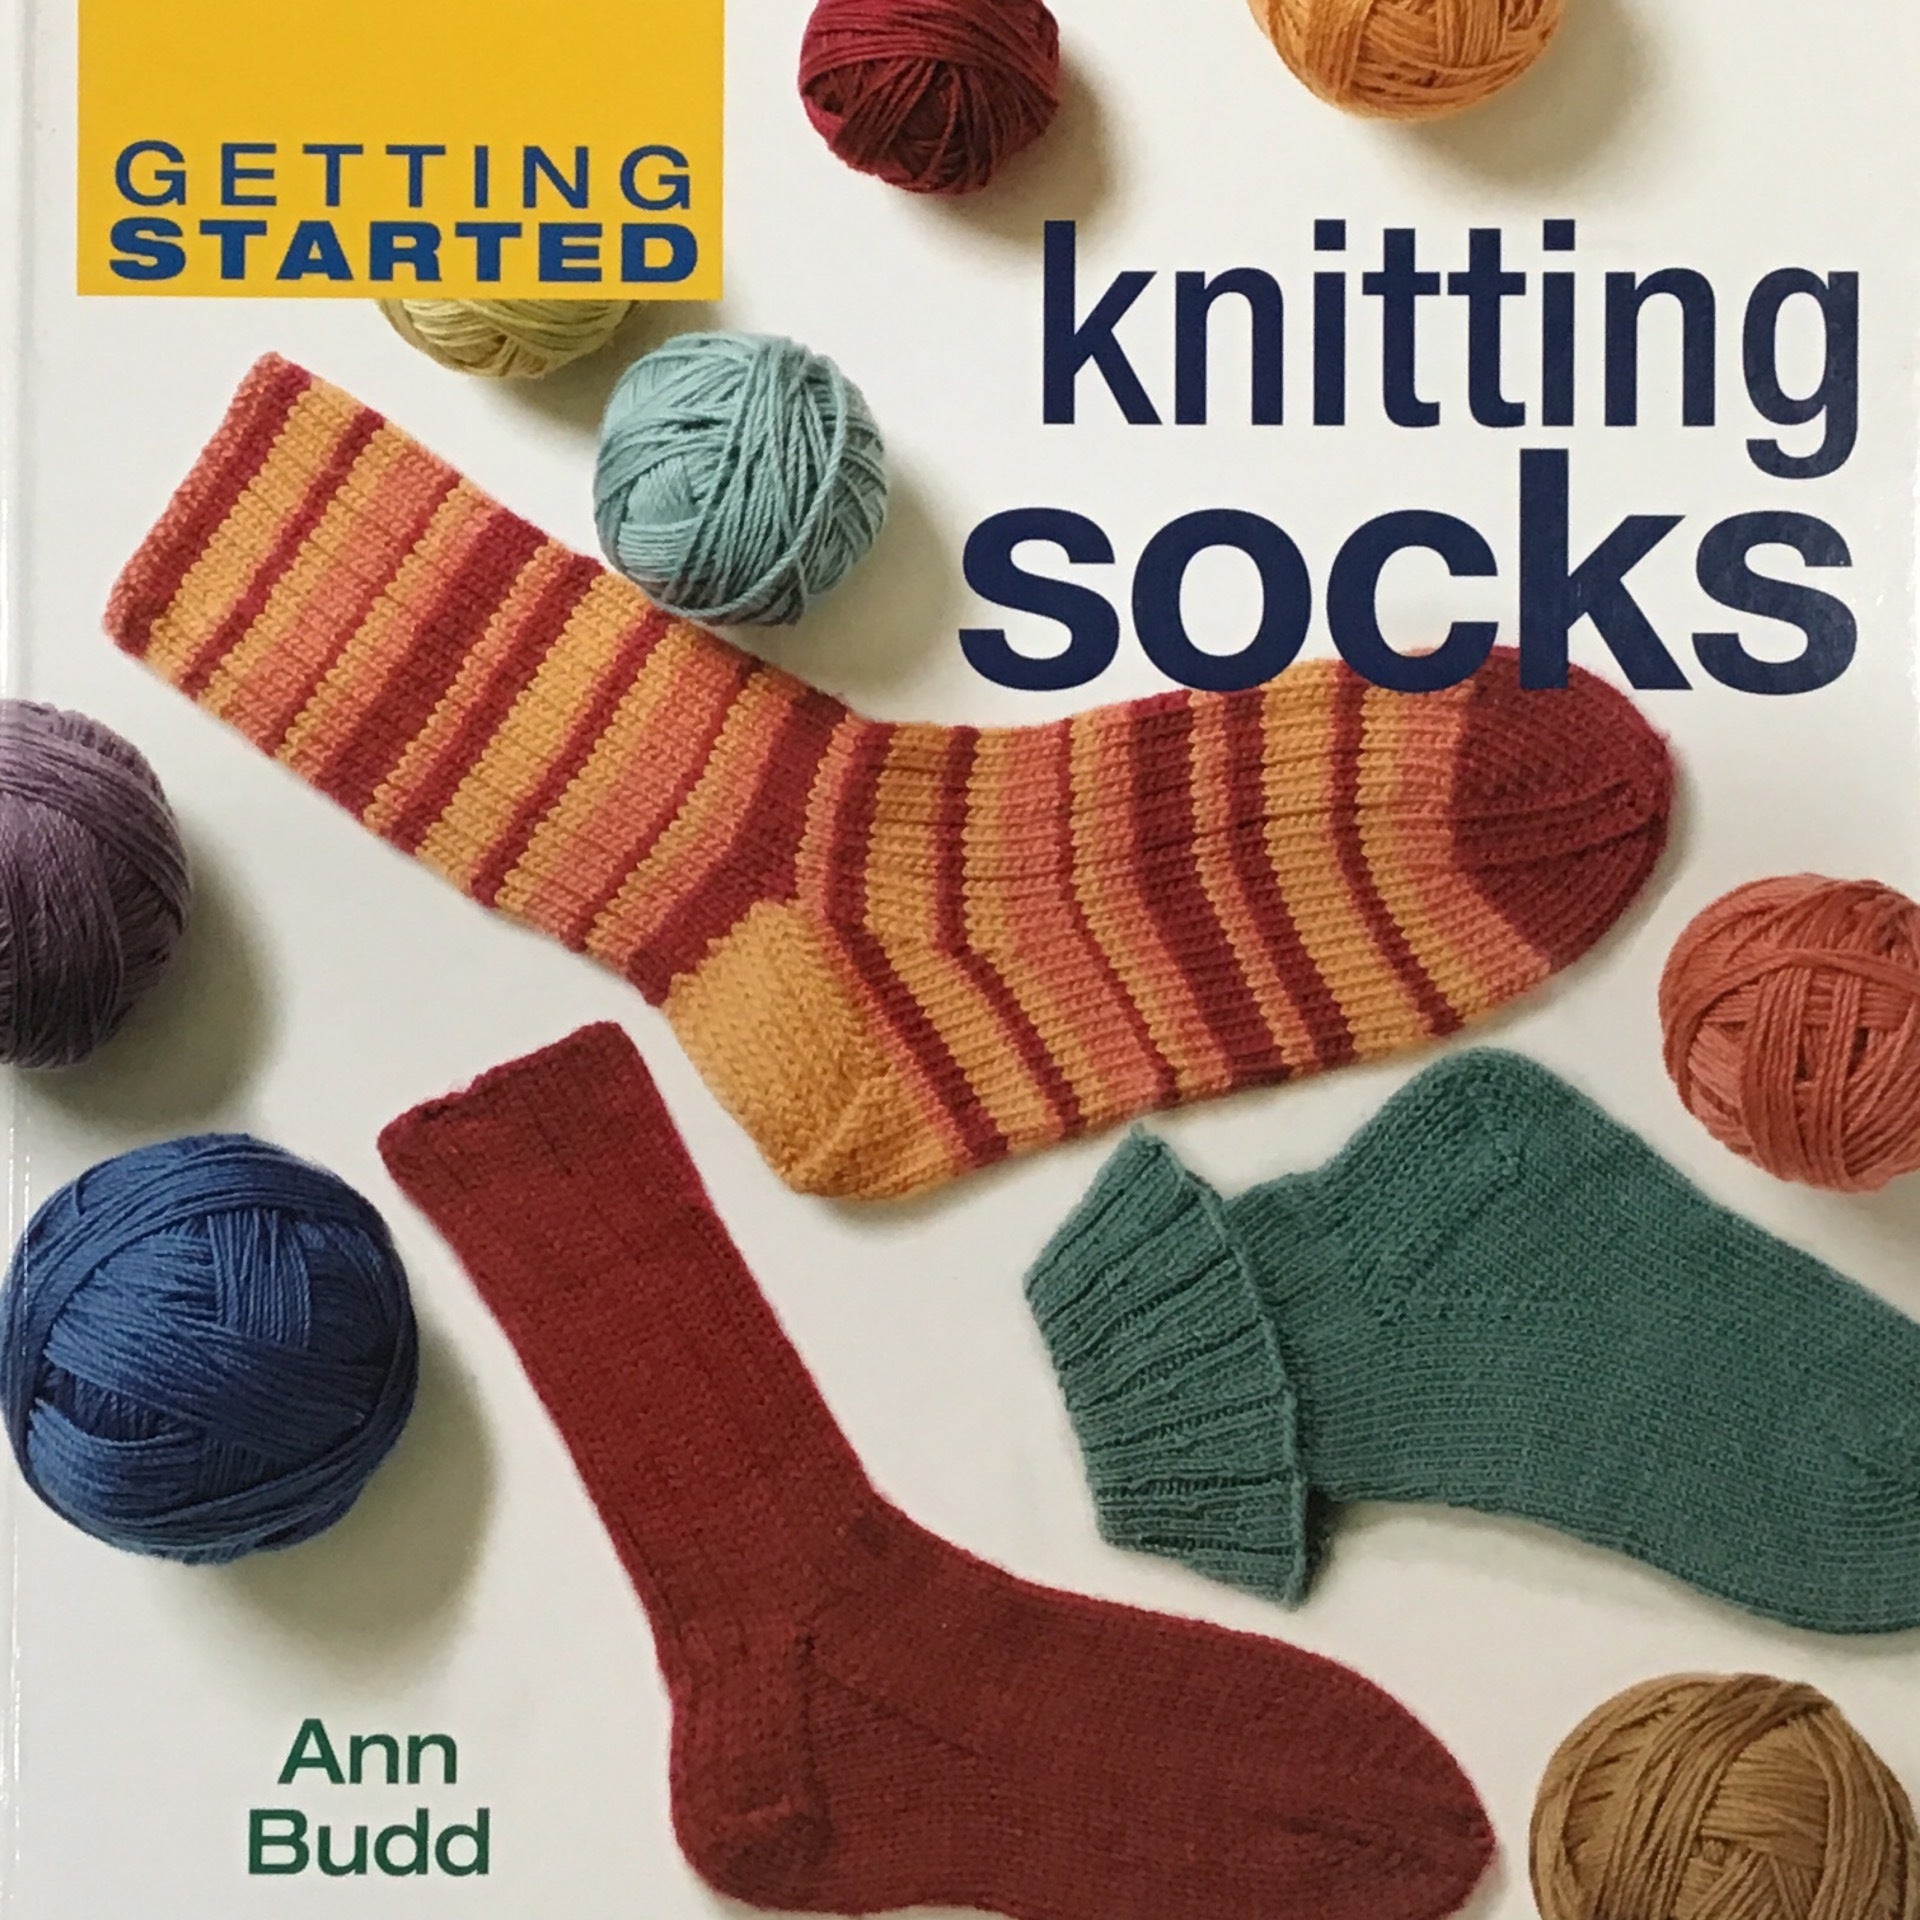 How To Knit For Beginners - Getting Started